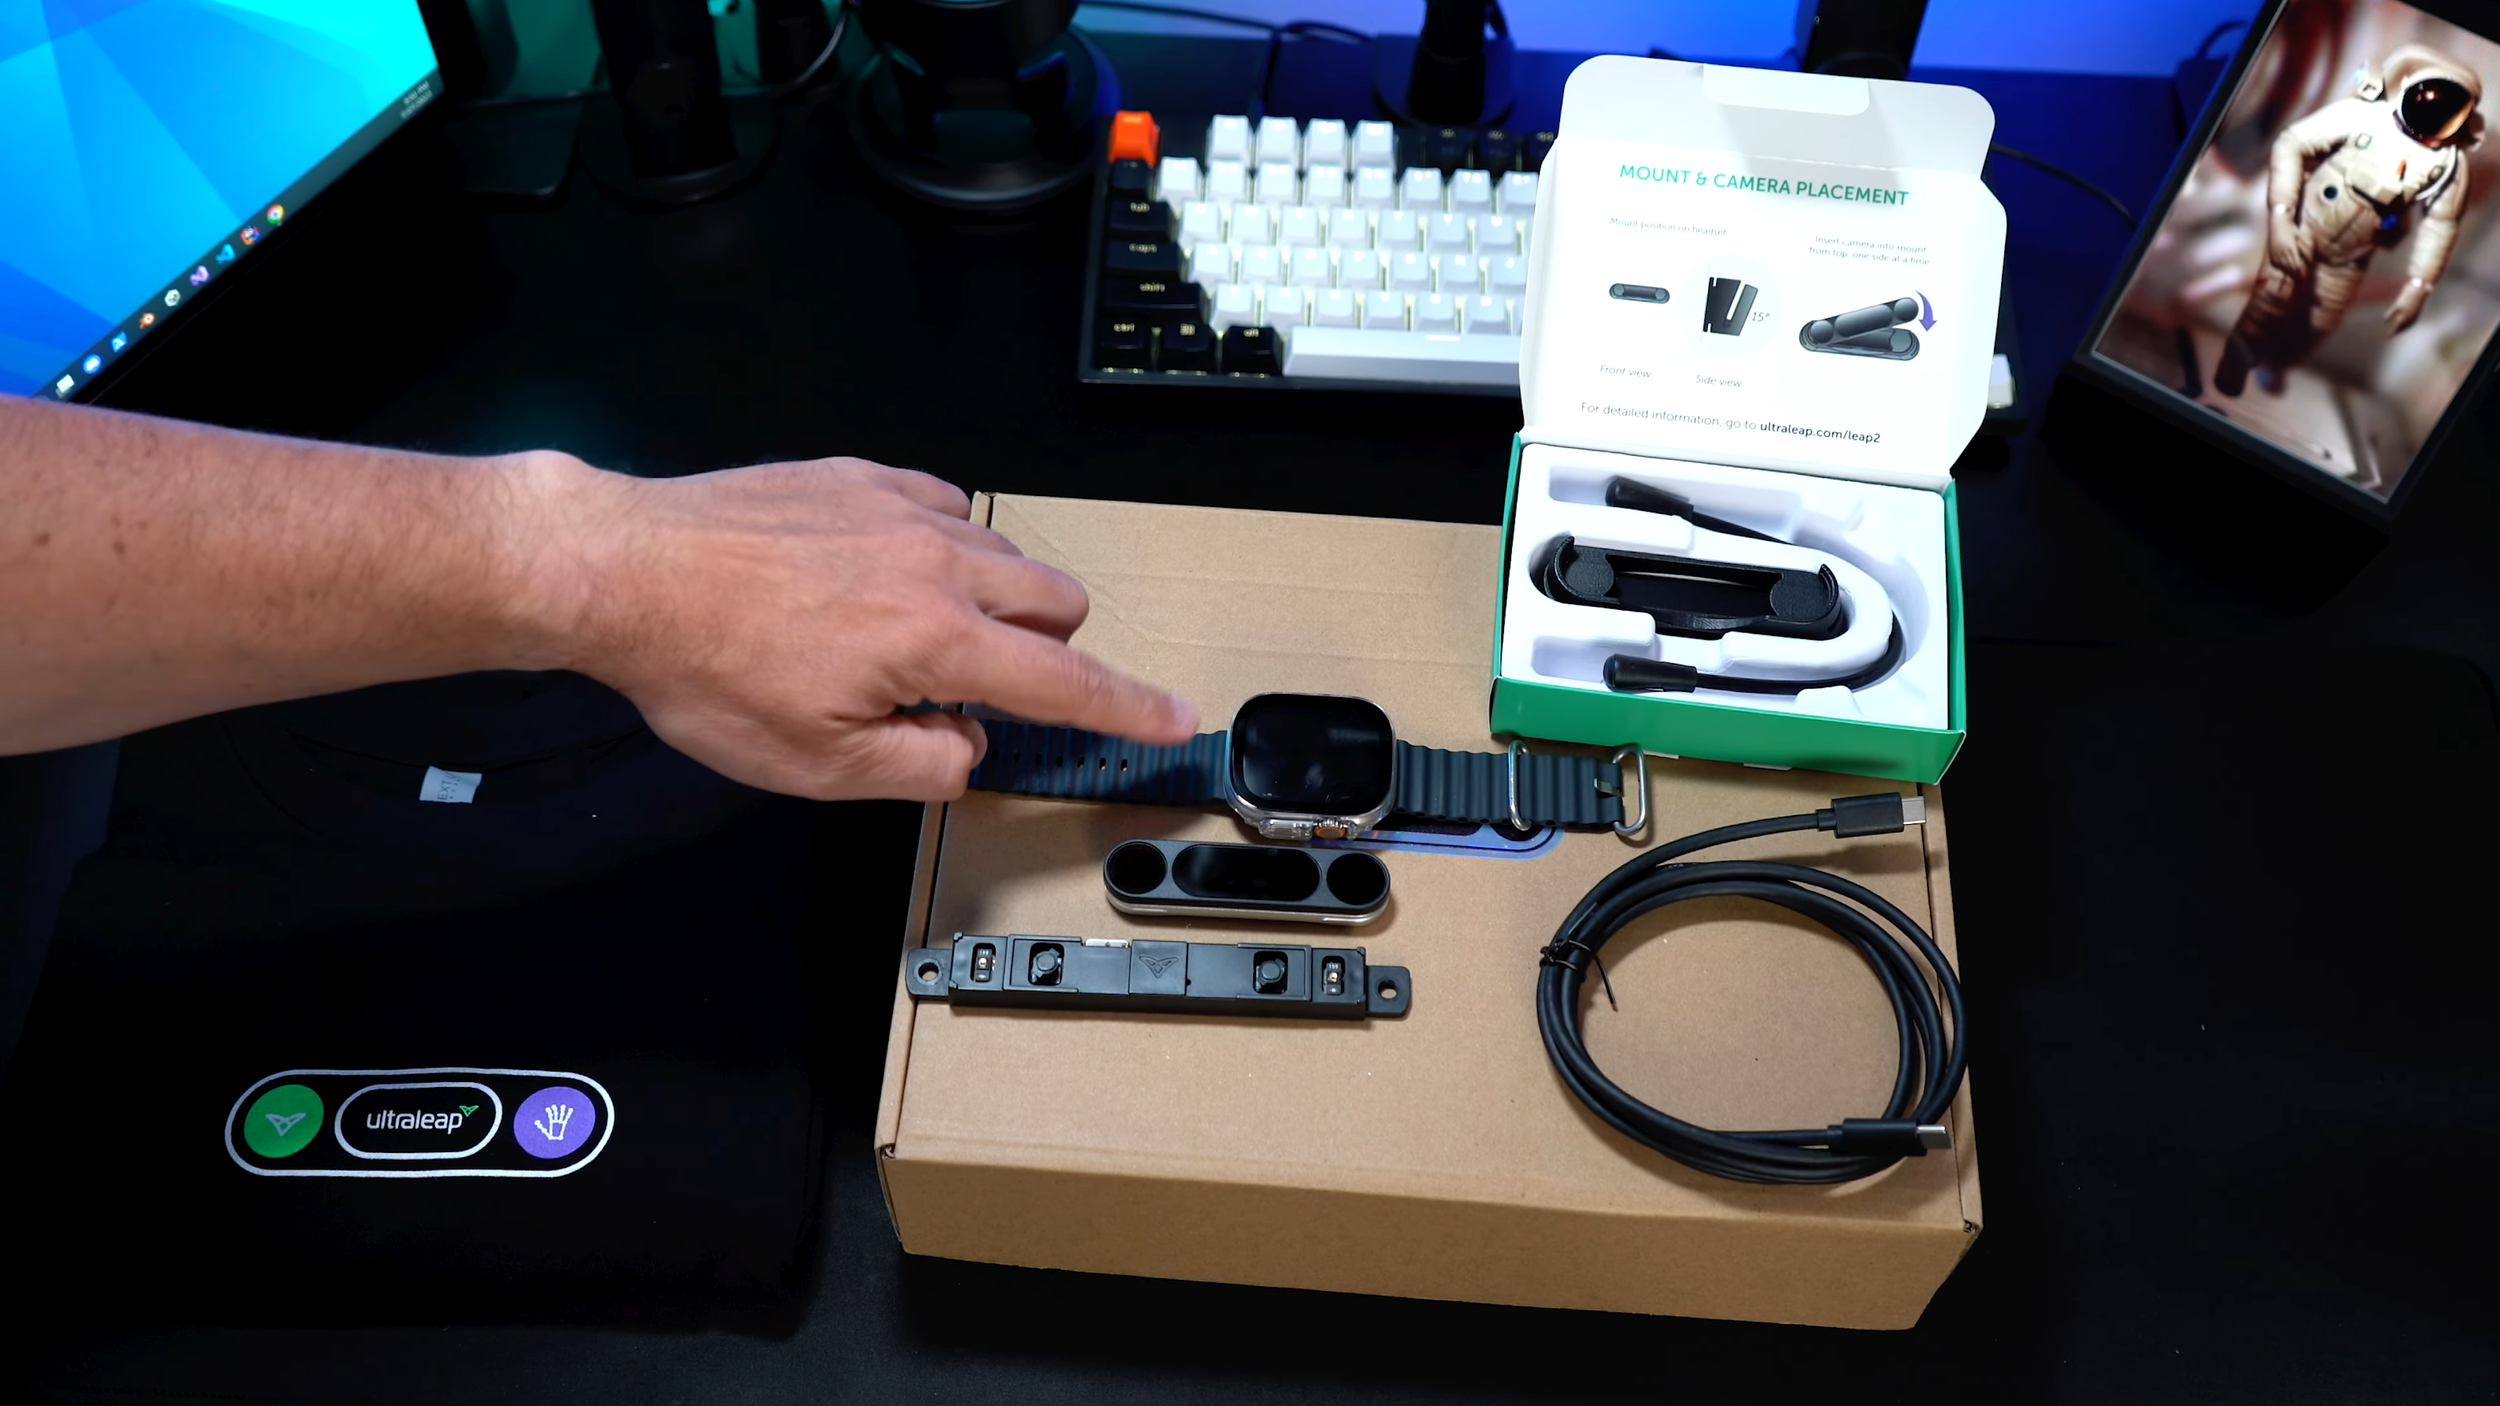 Ultraleap Leap Motion Controller 2 Is Here! (Specs, Demos, & Dev Tools) 1-27 screenshot.png